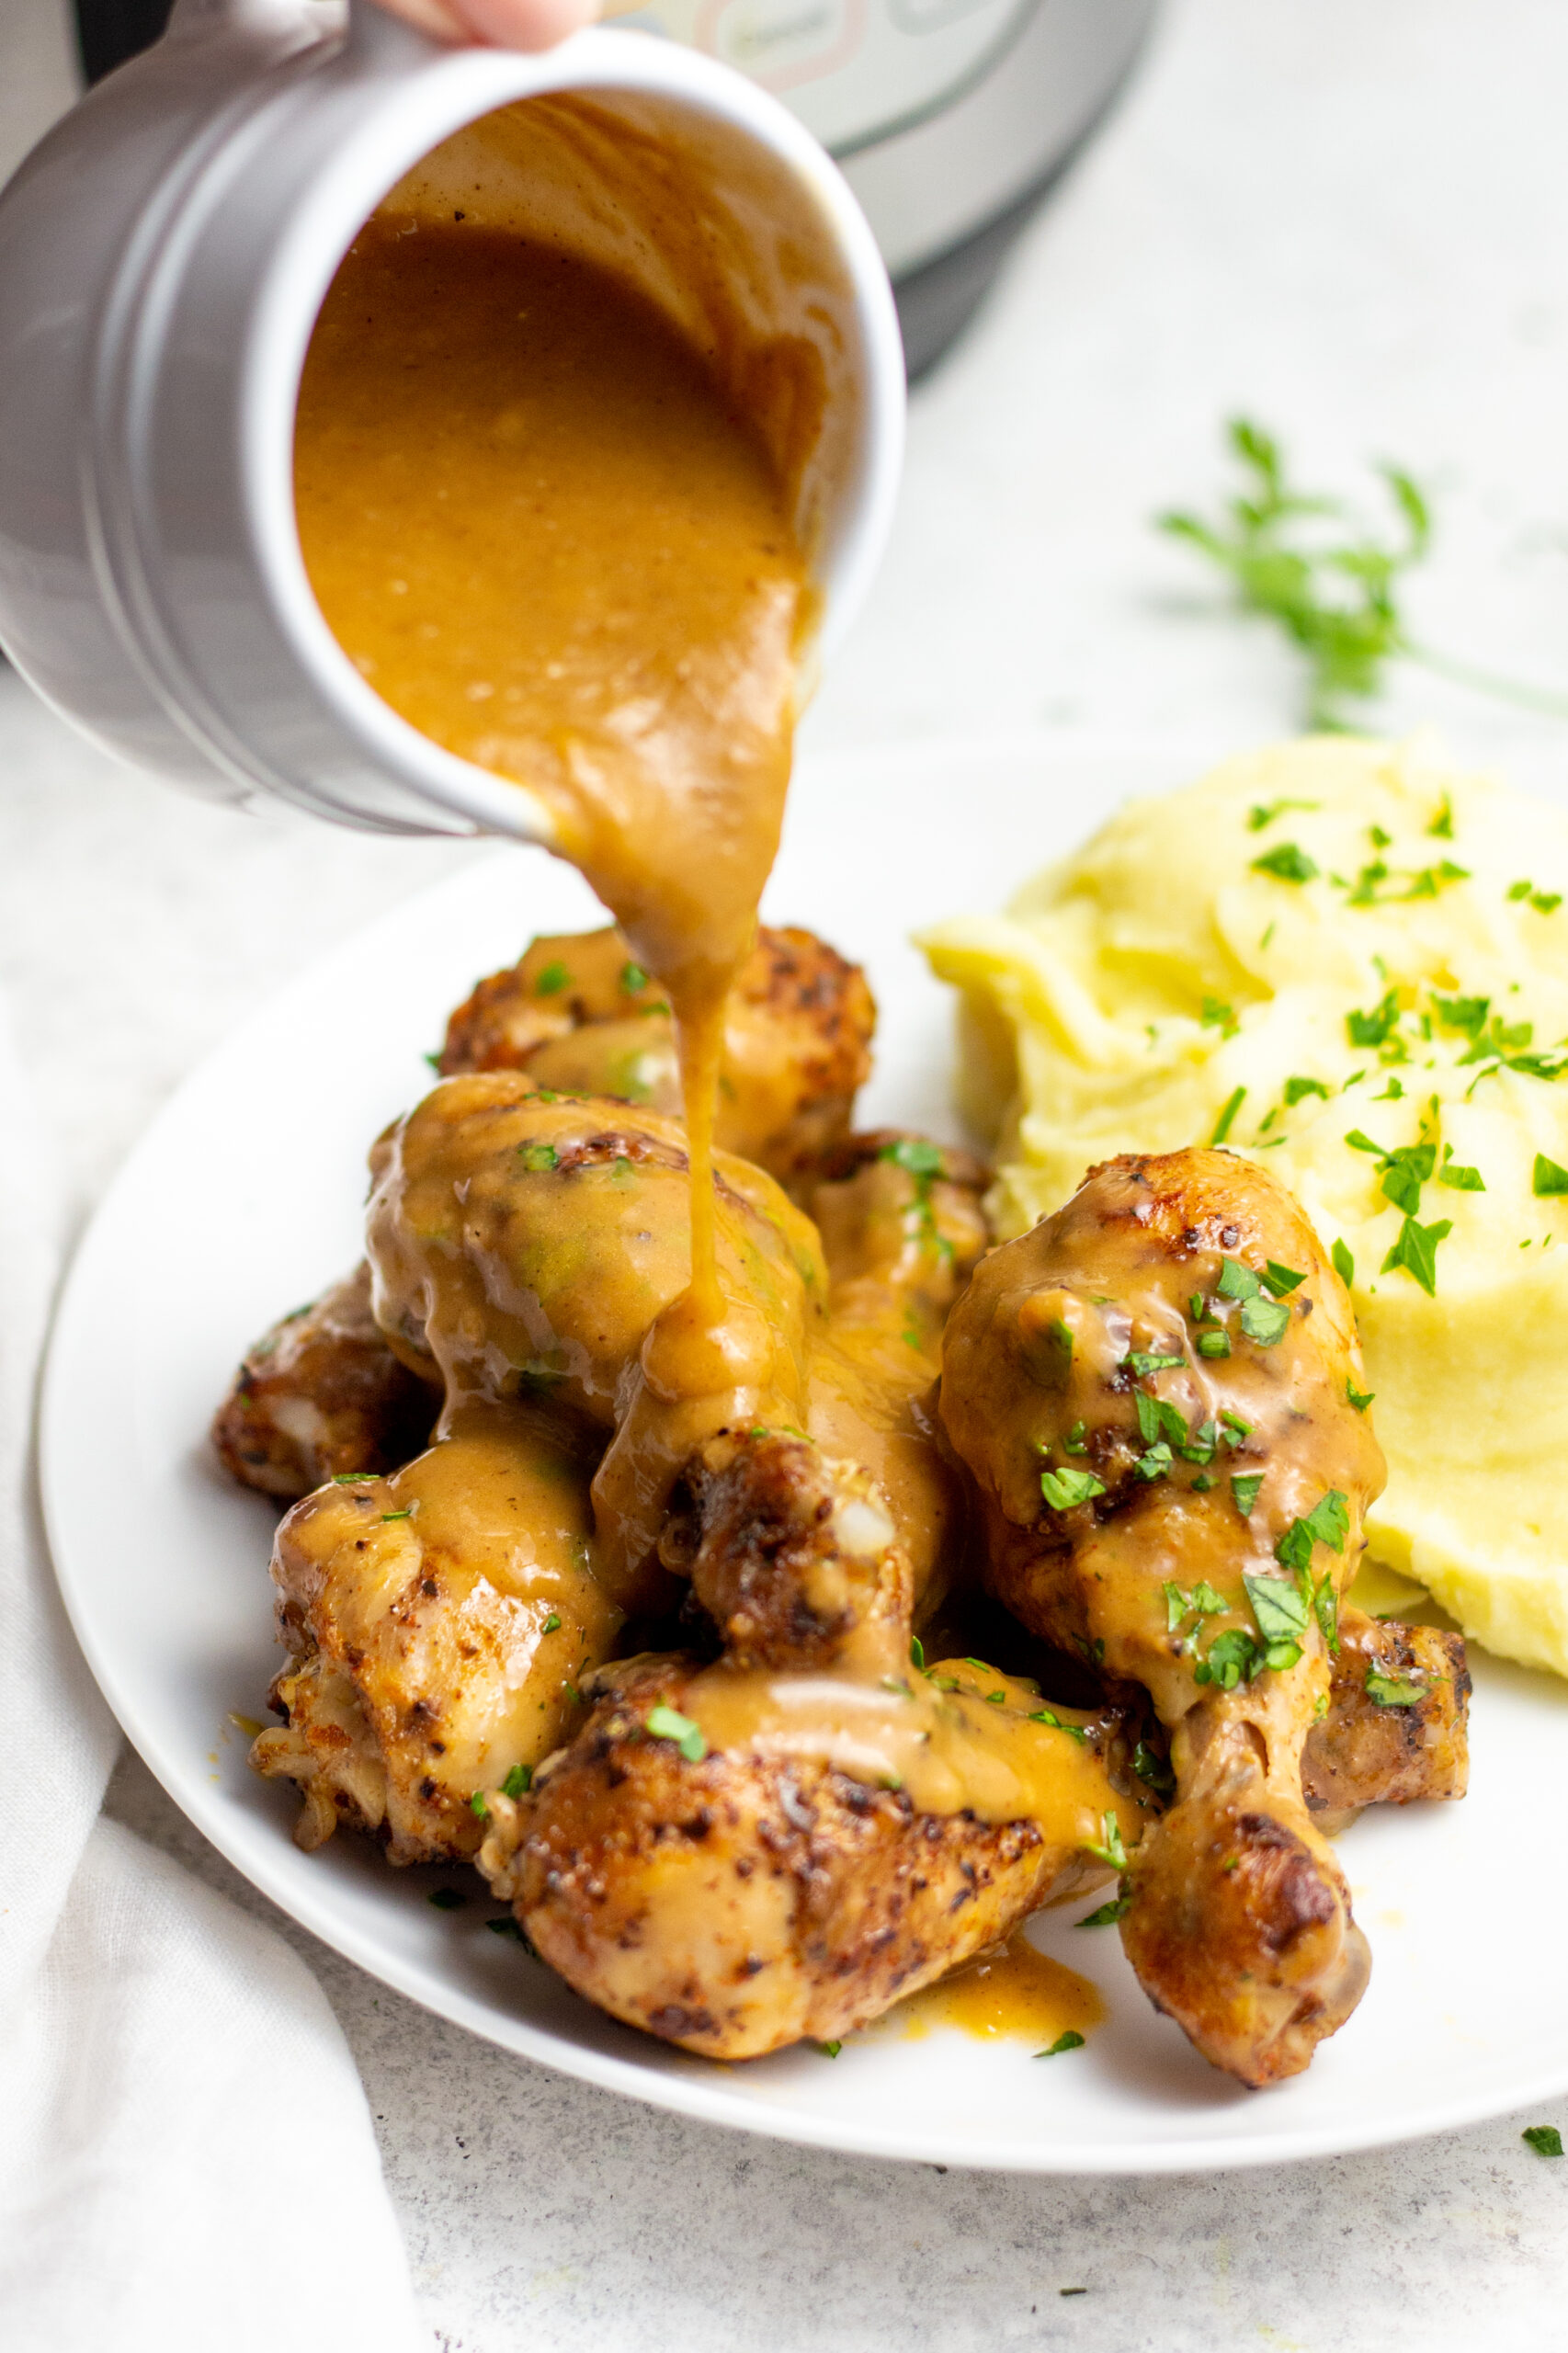 These instant pot chicken drumsticks are a fast way to get perfect chicken drumsticks without a lot of mess. They are both gluten and dairy free and are absolutely delicious. The homemade gravy makes this recipe perfect for a classic chicken and mashed potato meal the whole family will love, plus it's Whole30, paleo and low carb! This 30 minute, no mess instant pot chicken is sure to be a hit! #healthyrecipes #glutenfreerecipes #dairyfreerecipes #whole30recipes #glutenfreedairyfreerecipes #healthychickenrecipes #chickendrumsticks